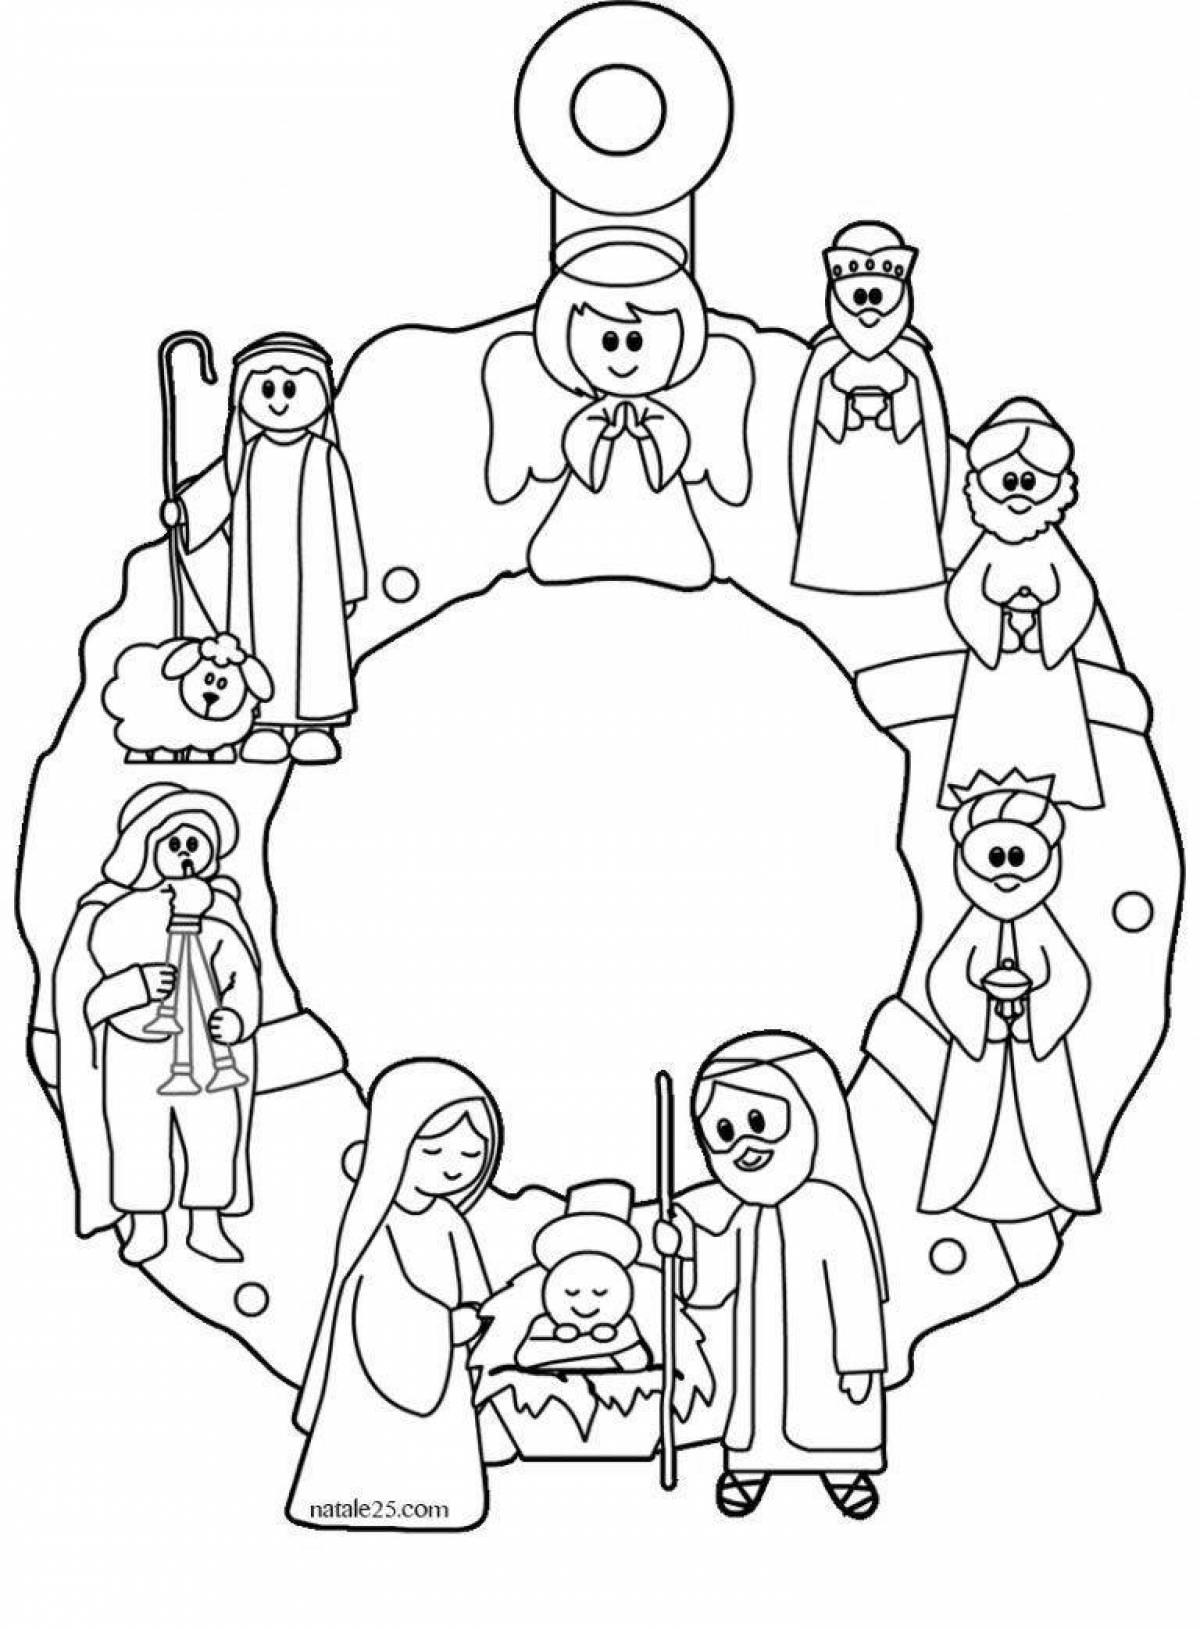 Merry Christmas coloring pages for Sunday school children